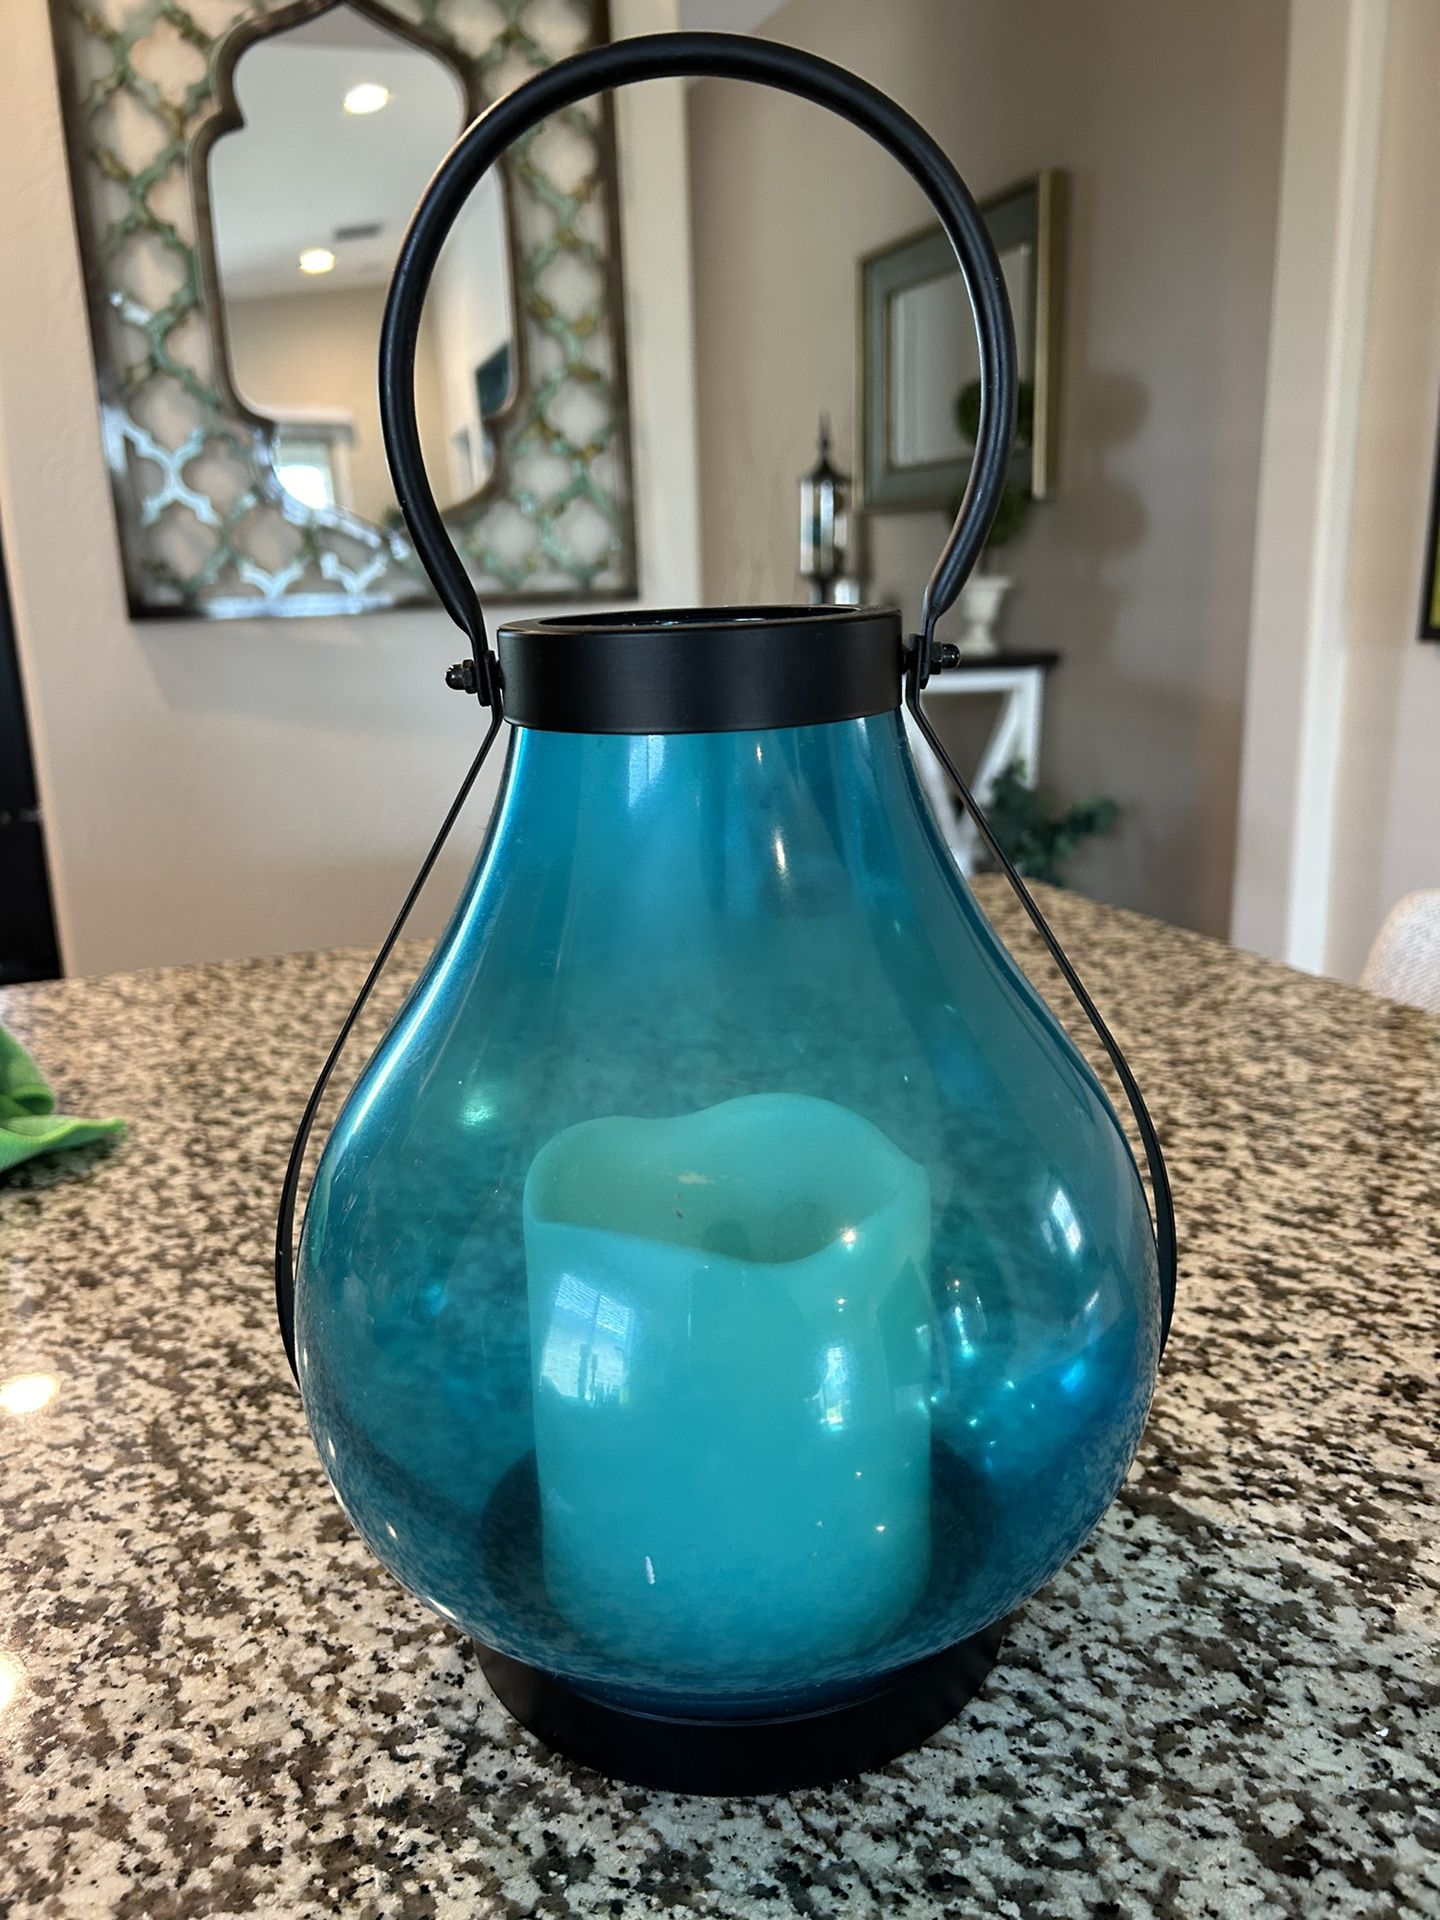 Turquoise Electric Candle Holder 